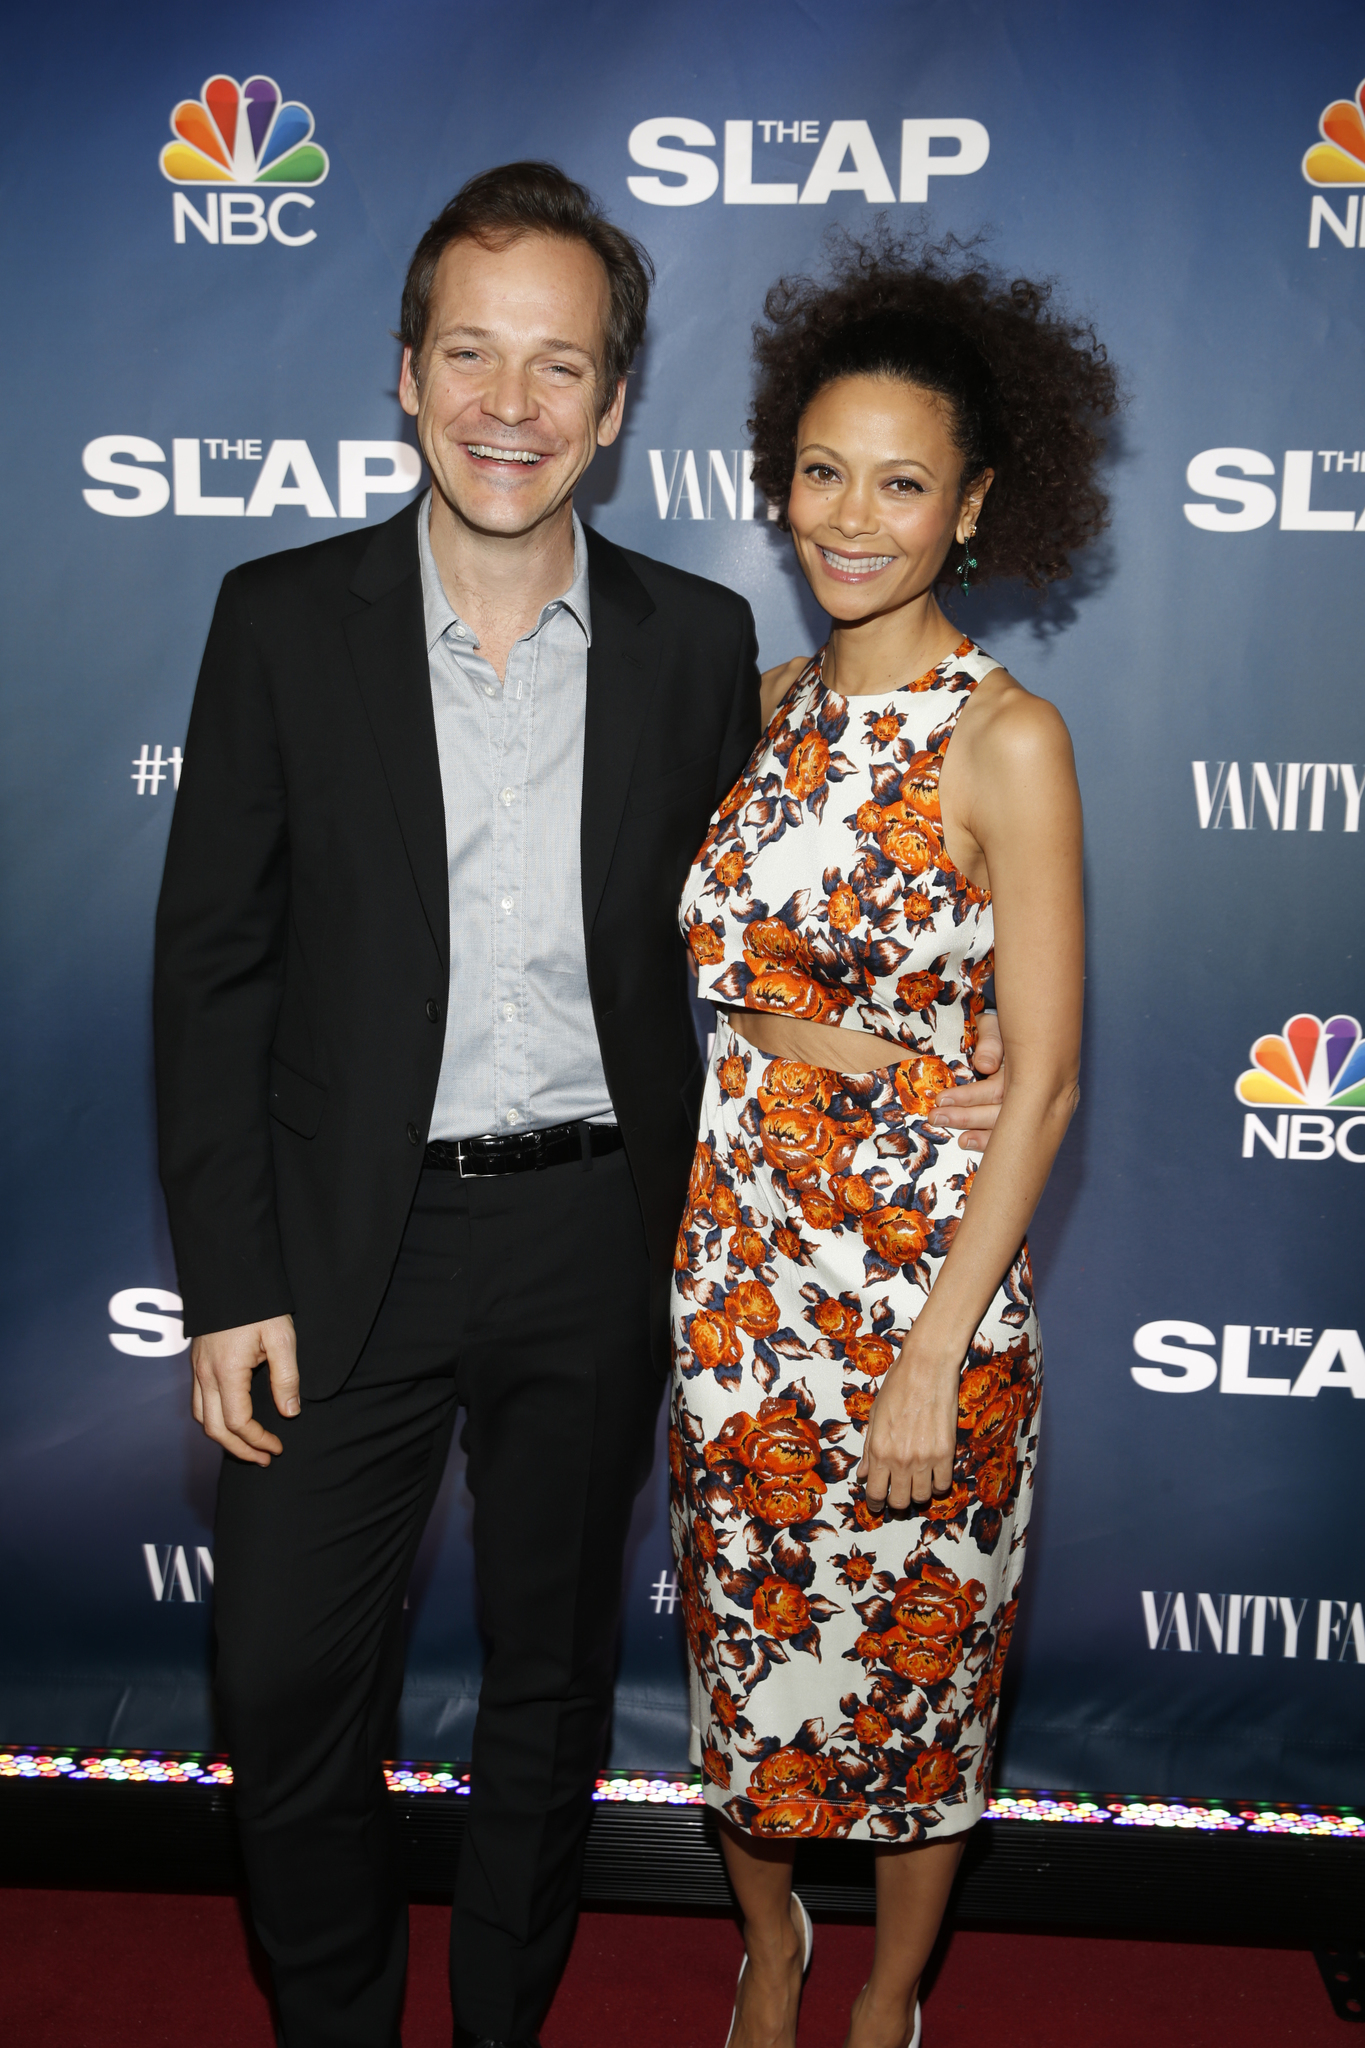 Thandie Newton and Peter Sarsgaard at event of The Slap (2015)